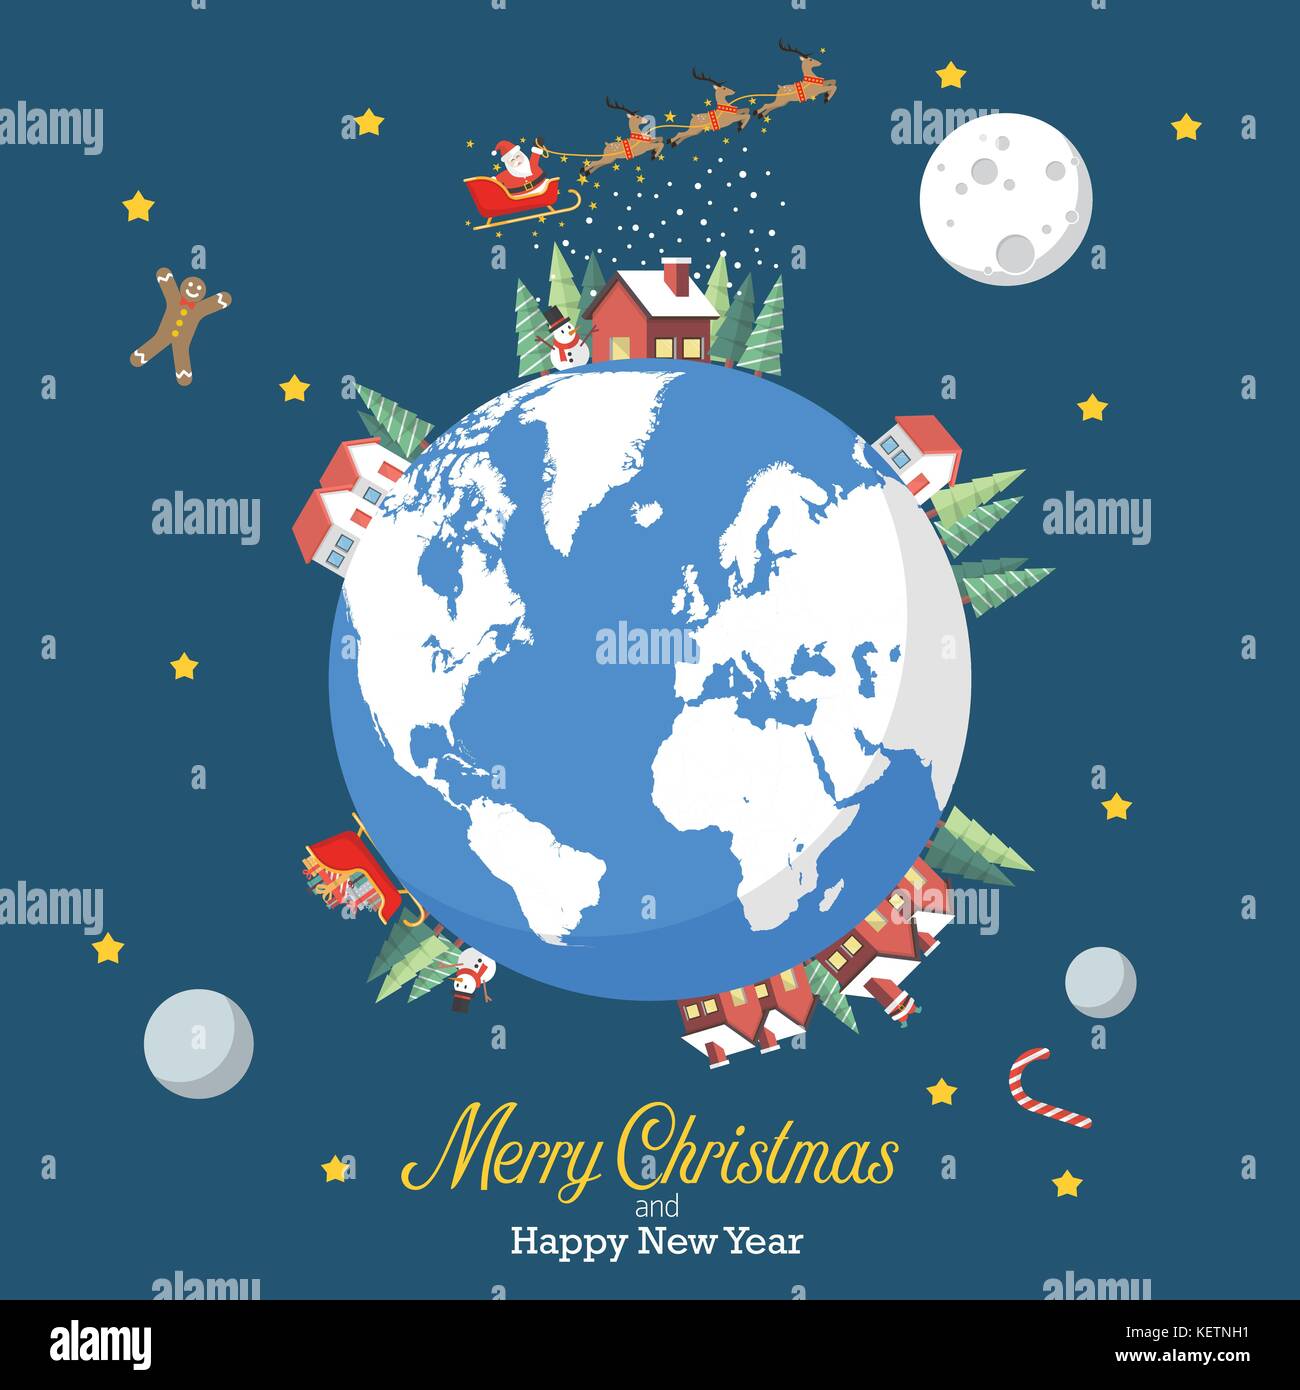 Merry Christmas and Happy New Year with earth globe. Greeting card vector illustration Stock Vector